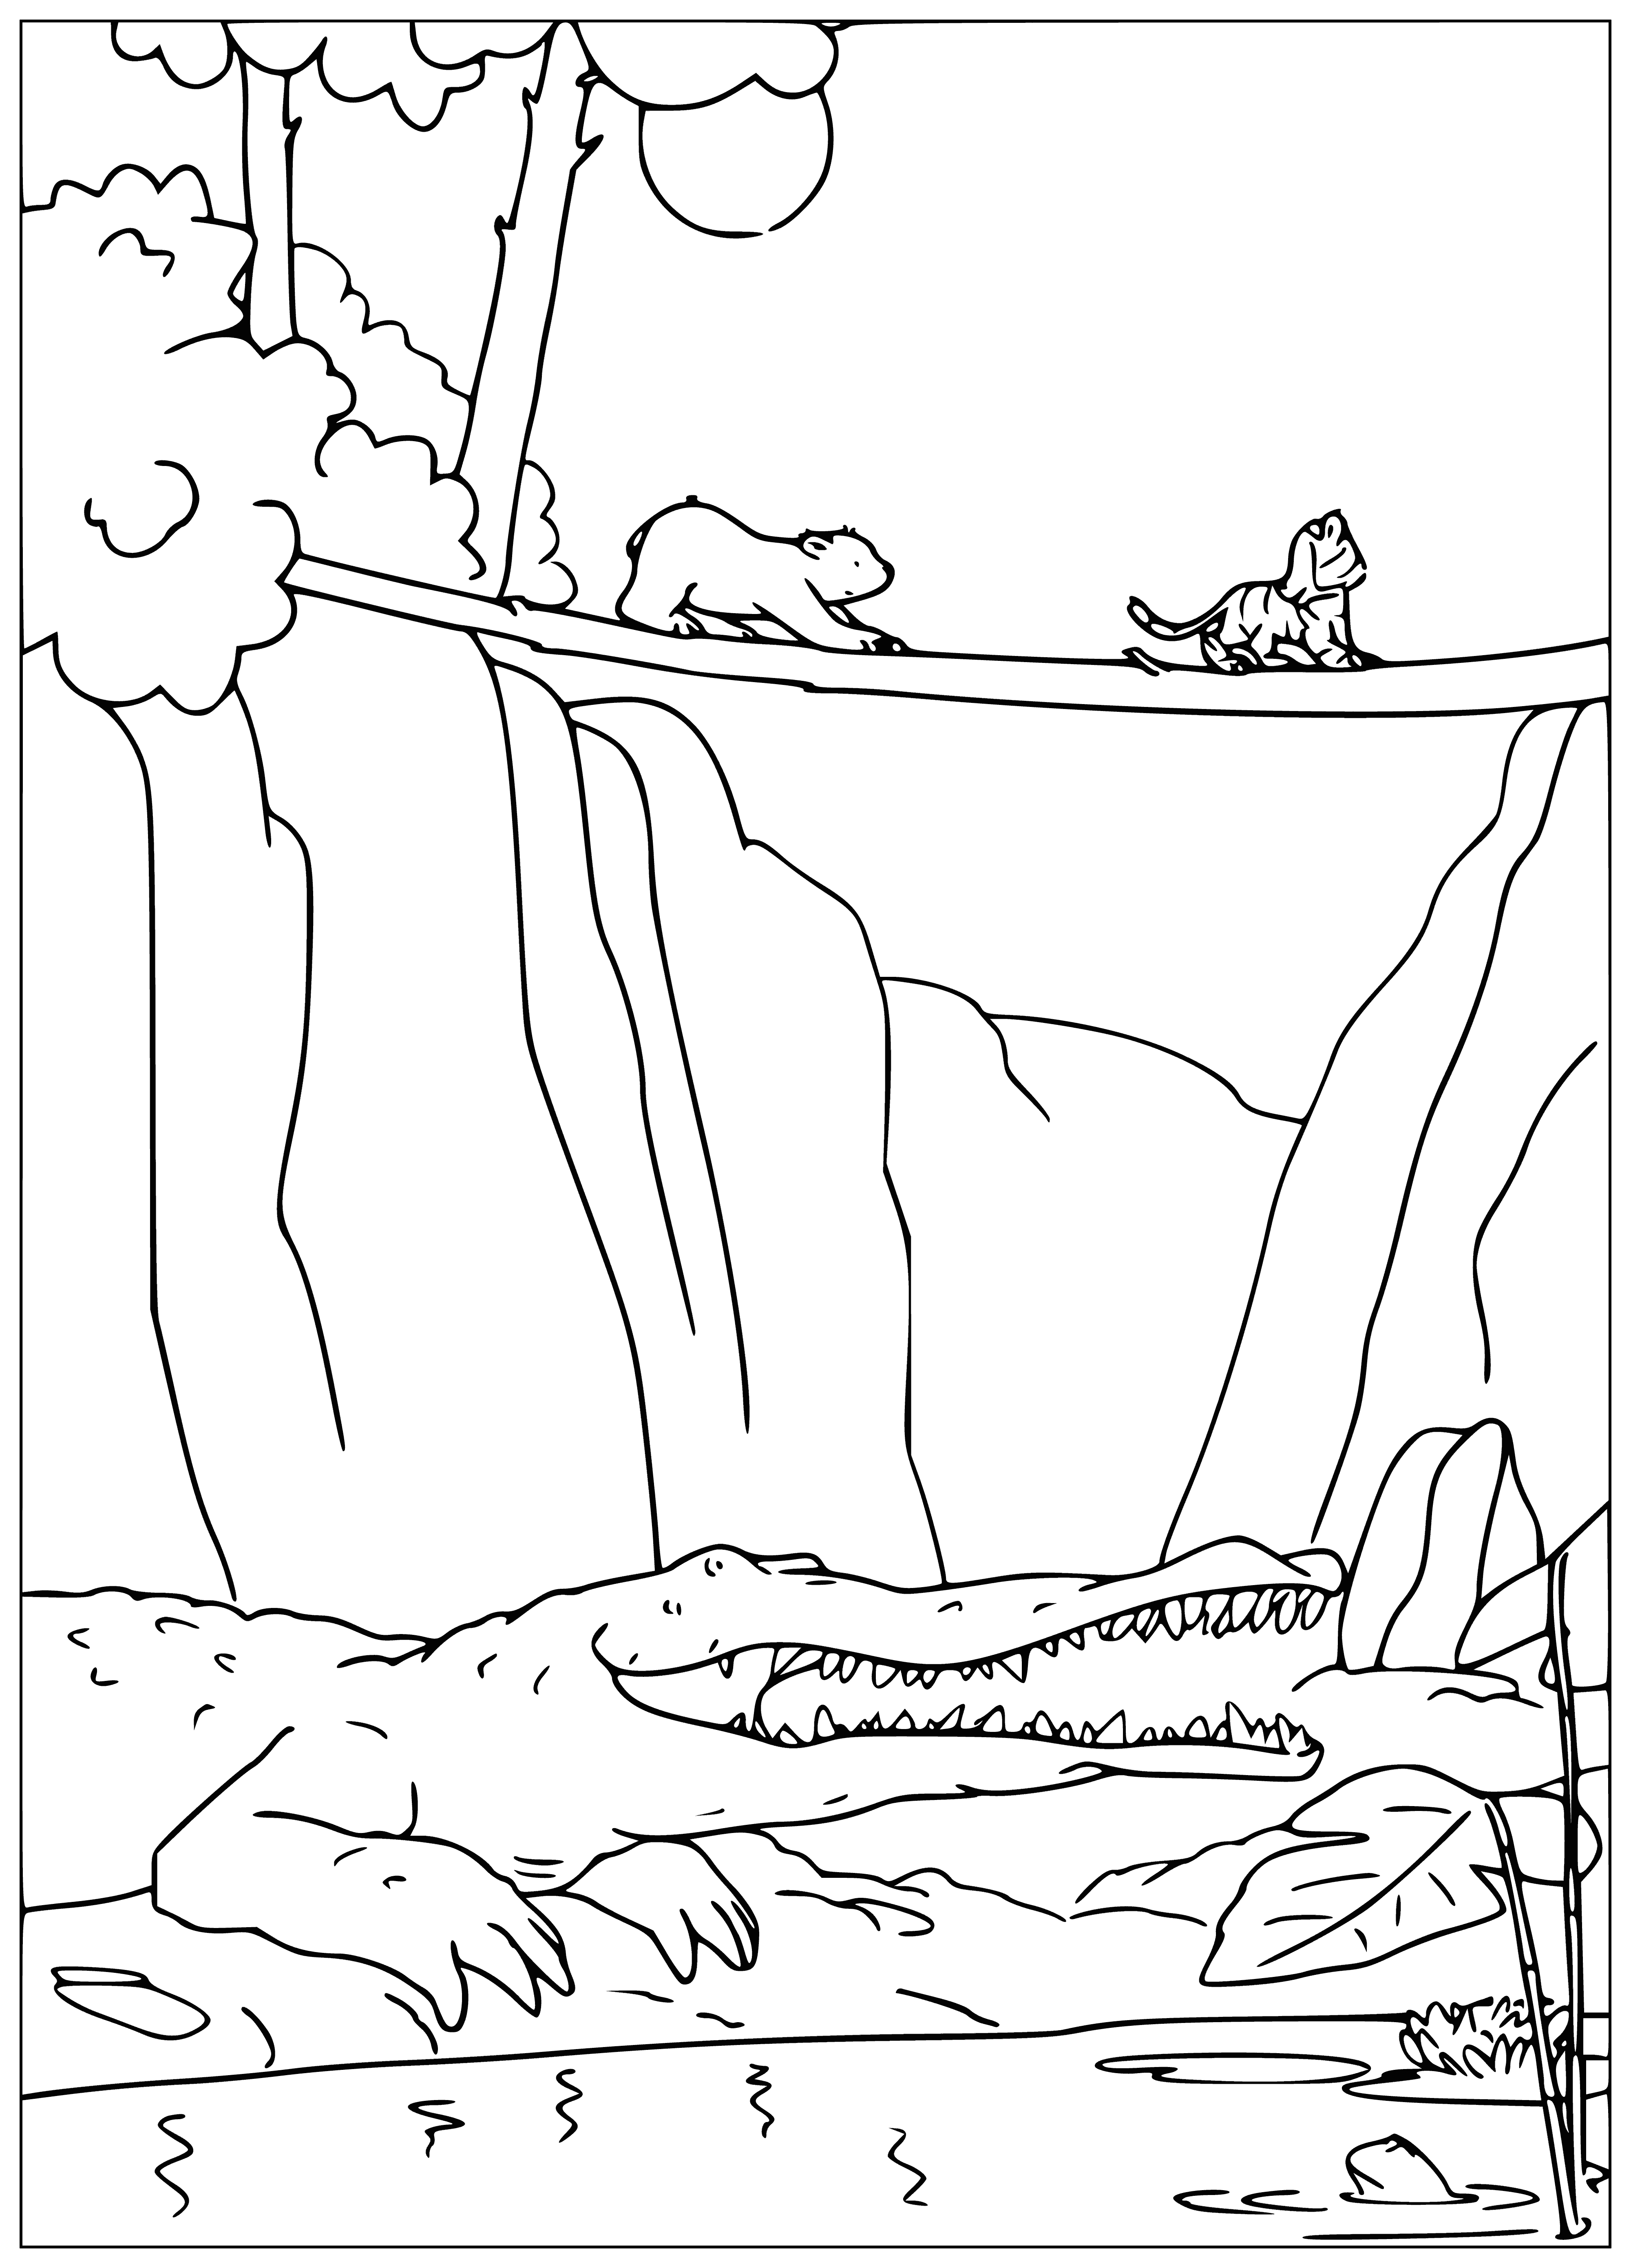 coloring page: Polar bear is standing on bridge, looking at forest beyond river.